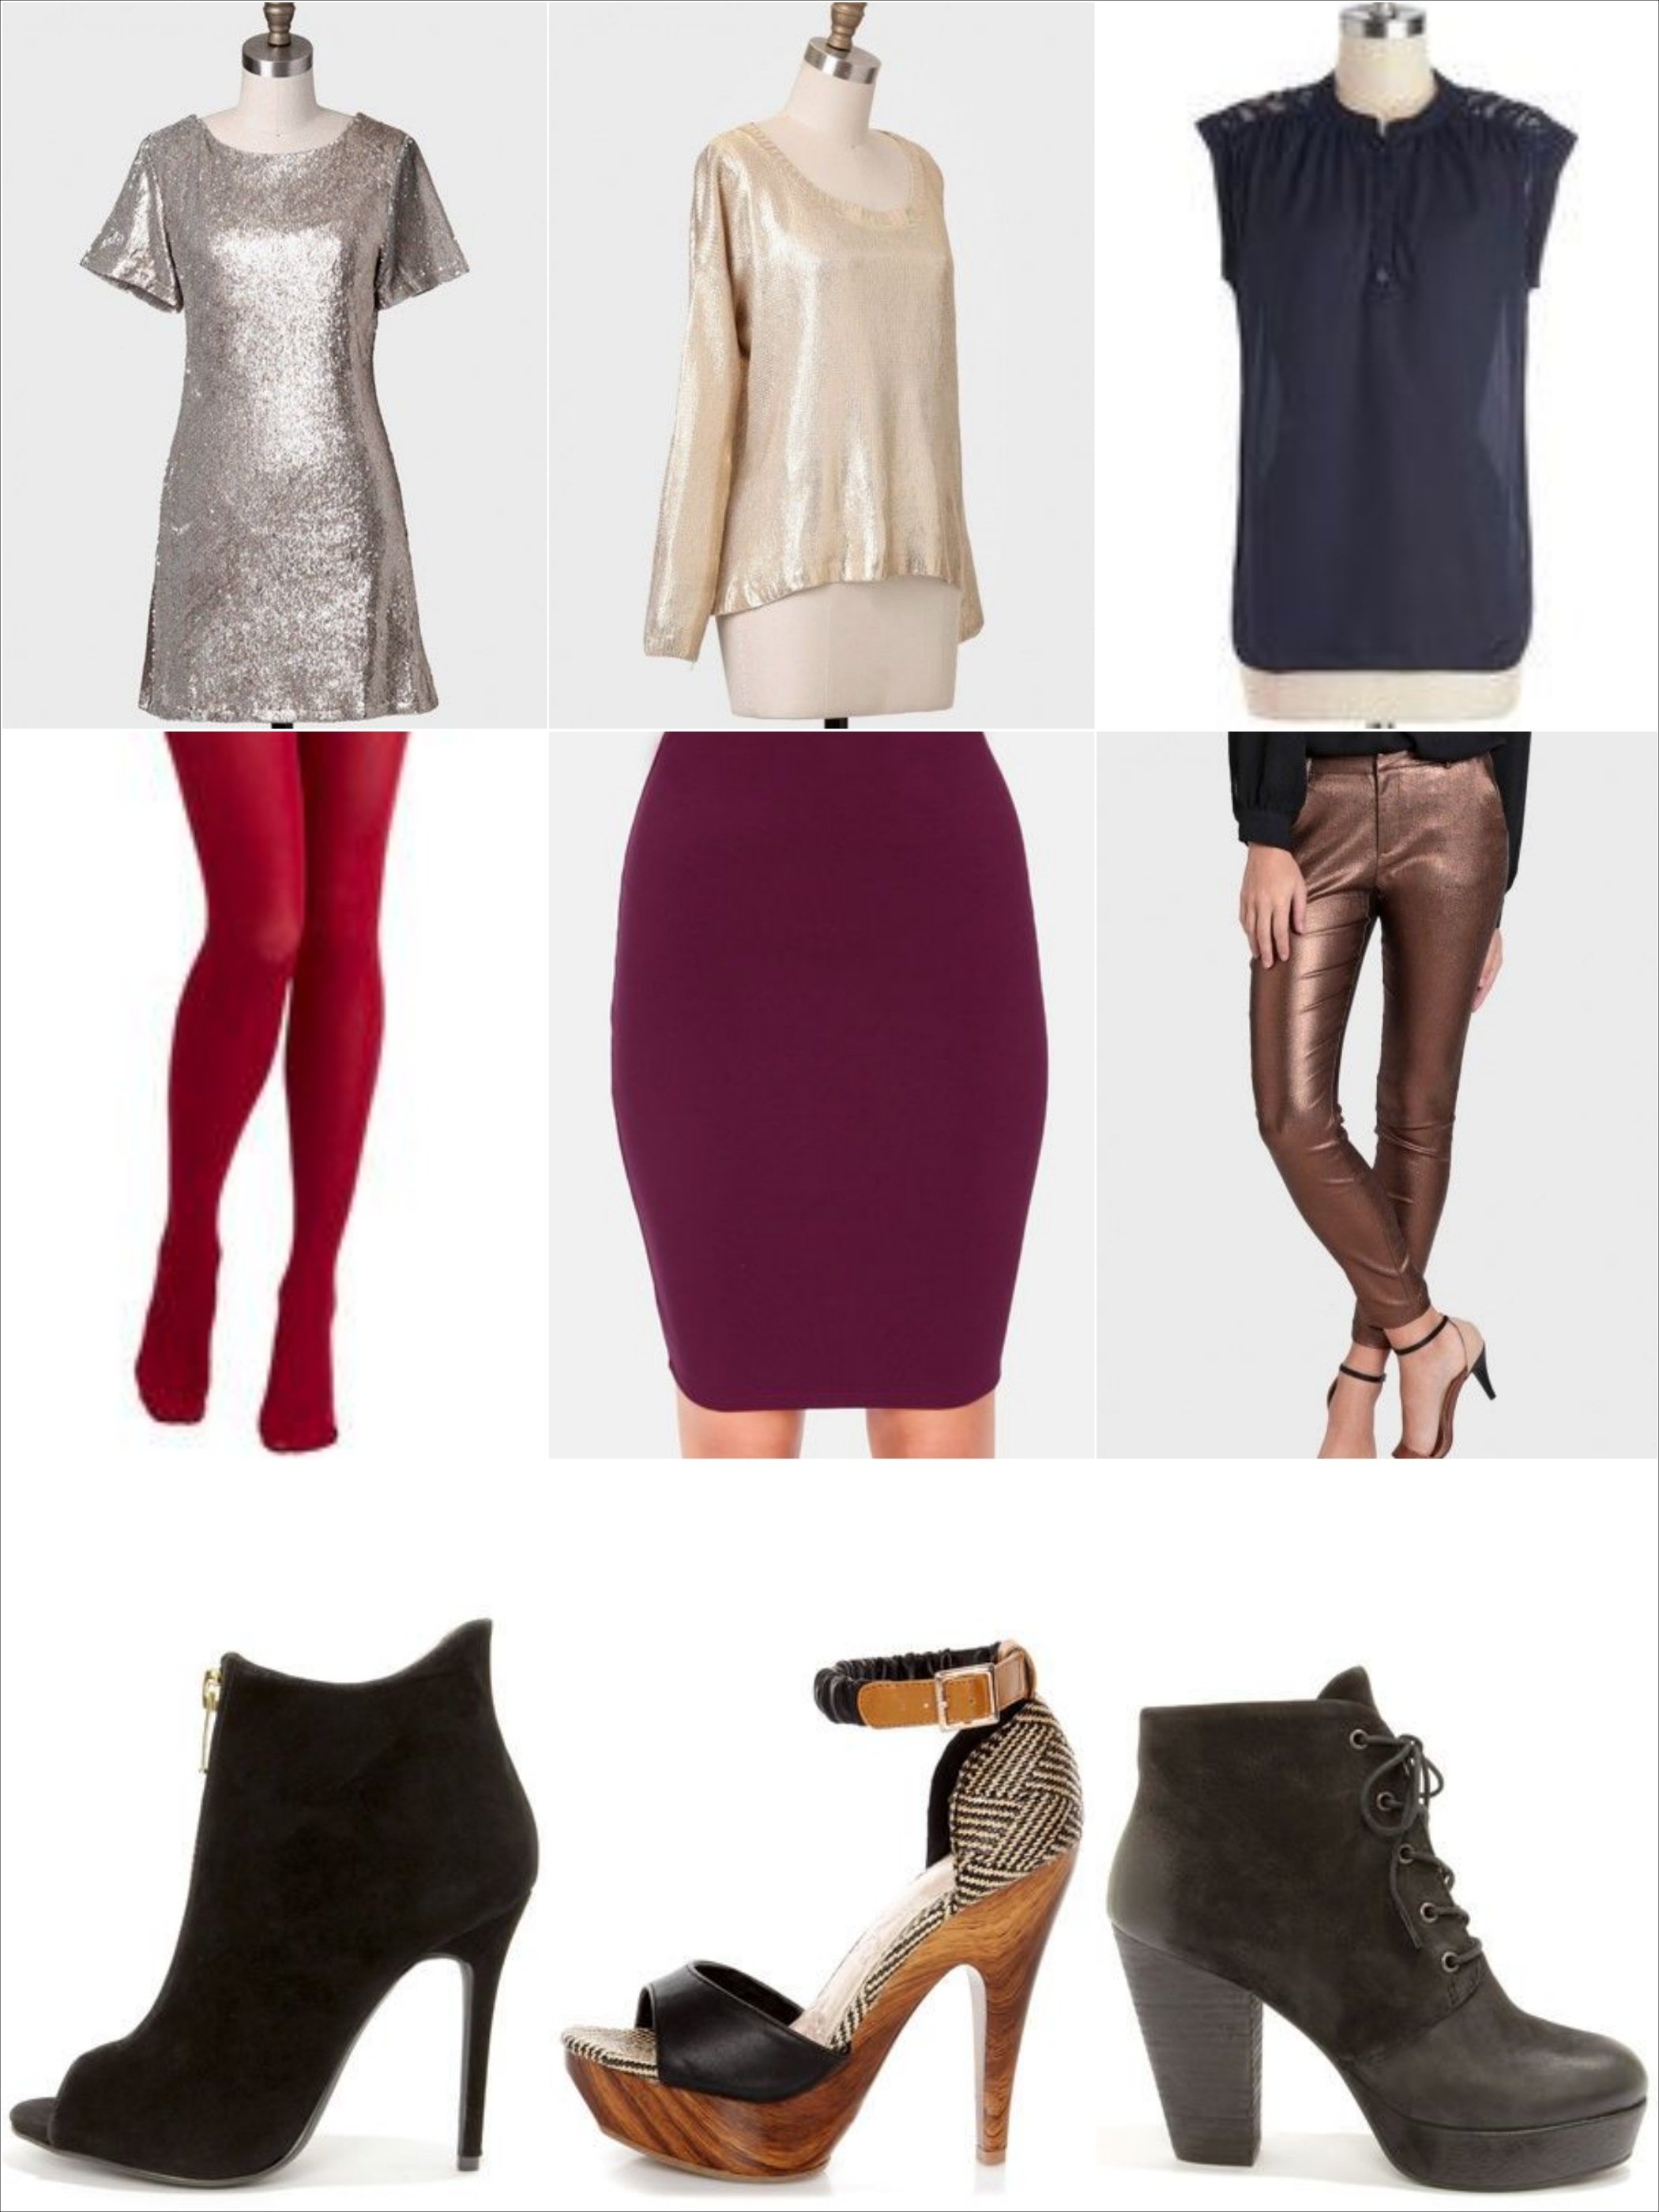 10 Nice New Years Outfit Ideas 2013 bring in the new year with sparkle bottled creativity 2022